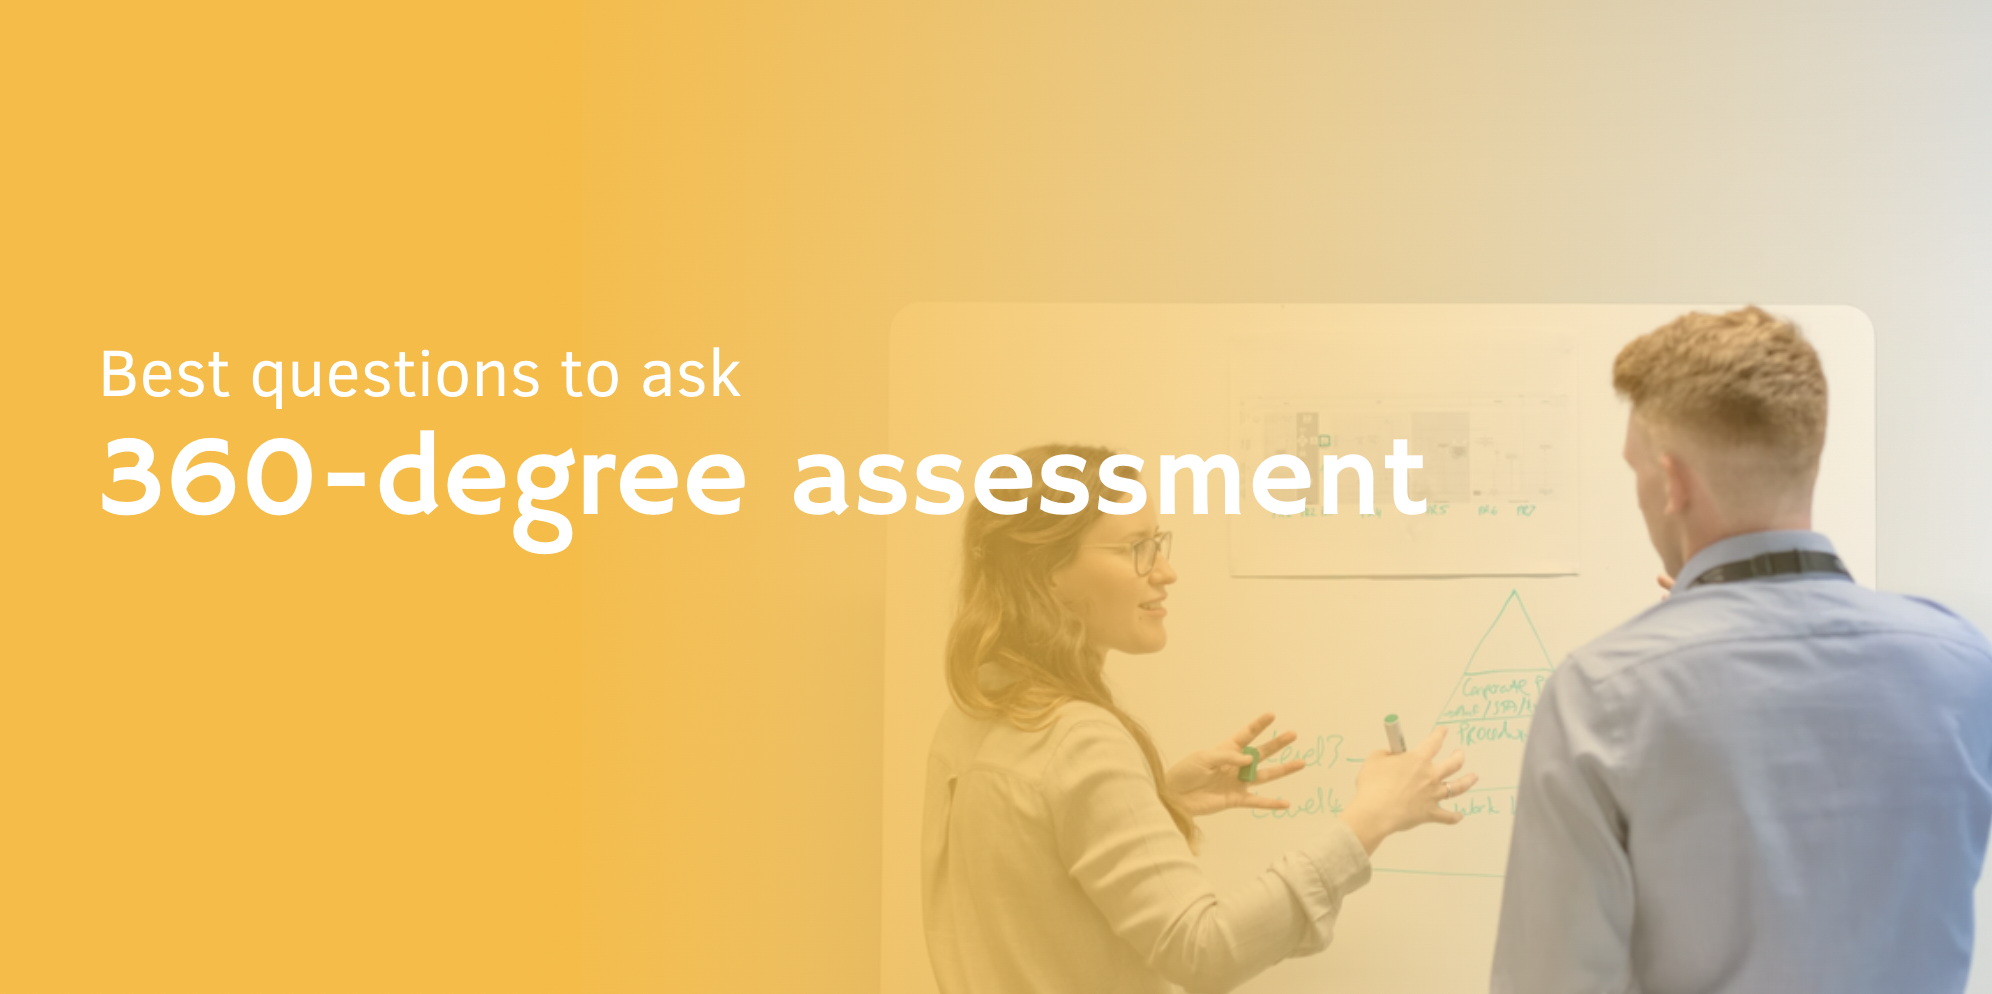 Best questions to ask during 360-degree feedback review [+ bonus question]